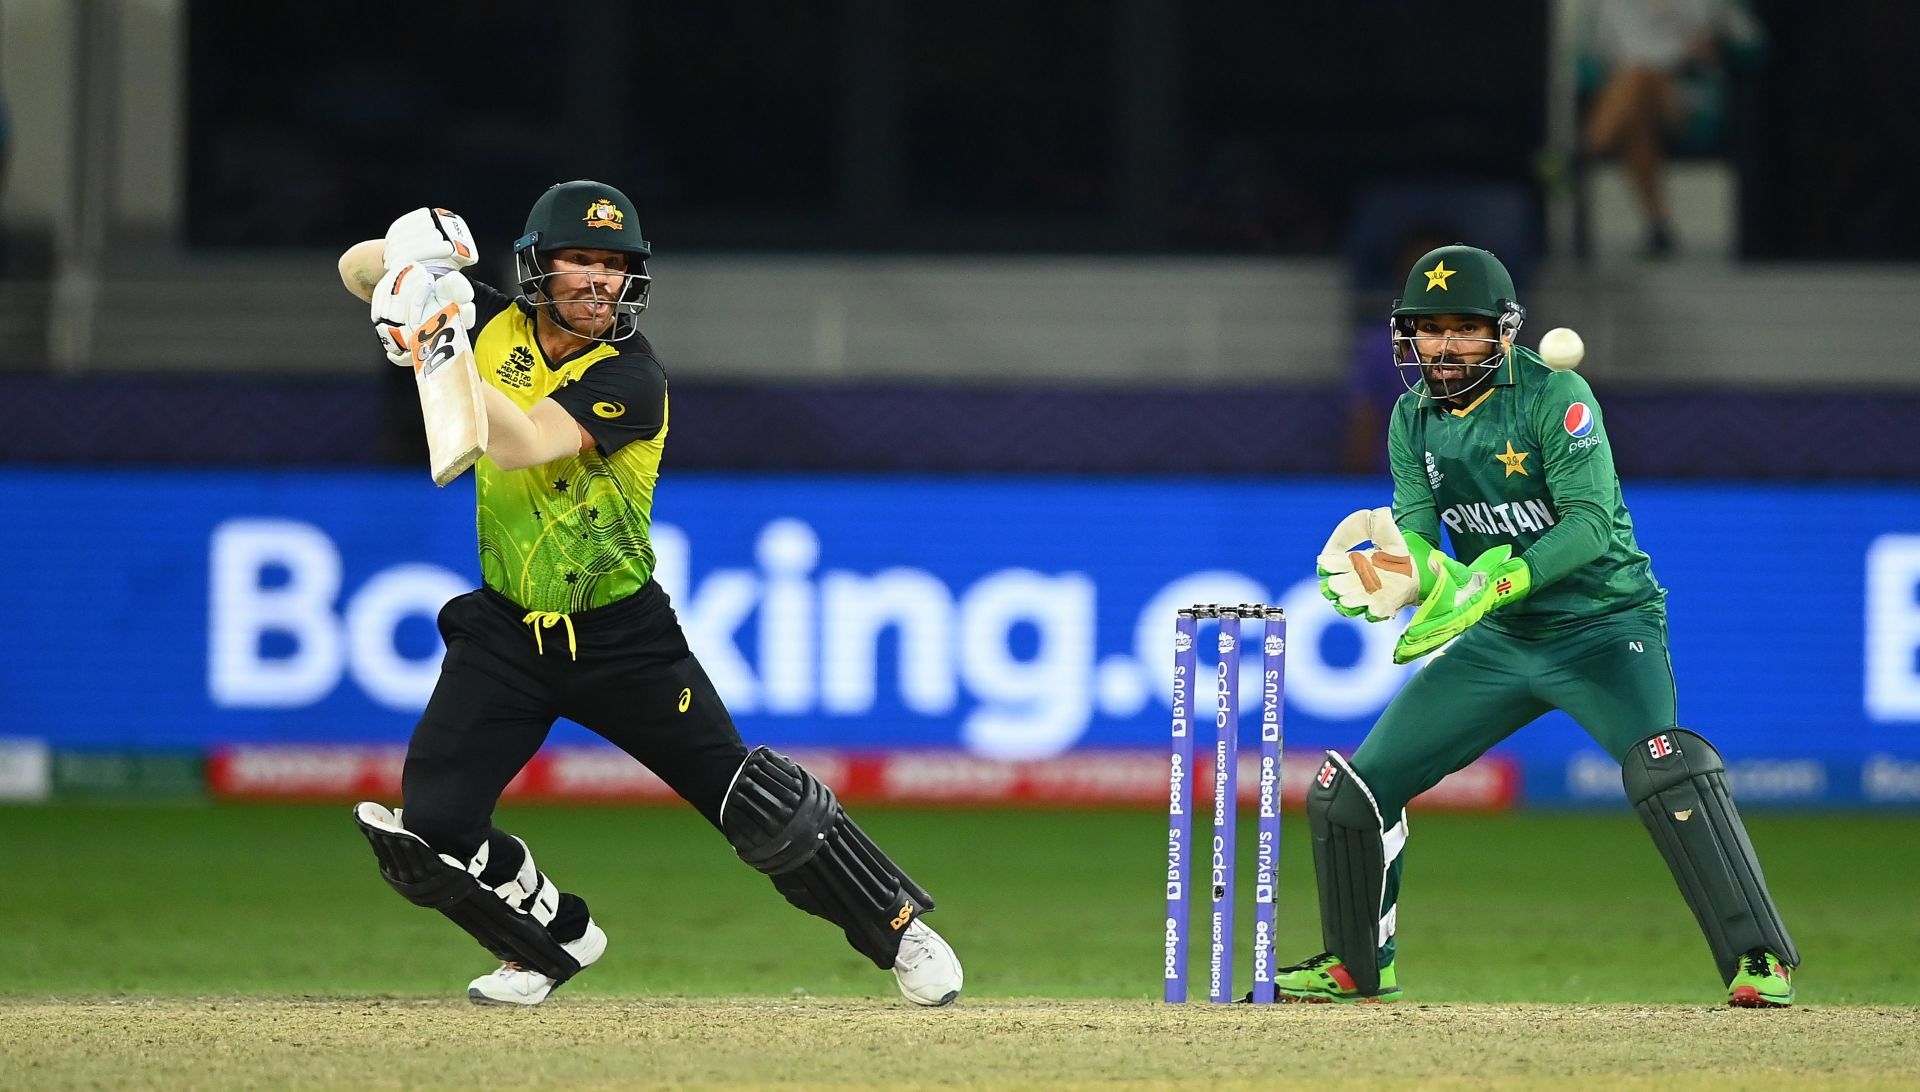 David Warner could not complete his half-century in the T20 World Cup 2021 semifinal against Pakistan